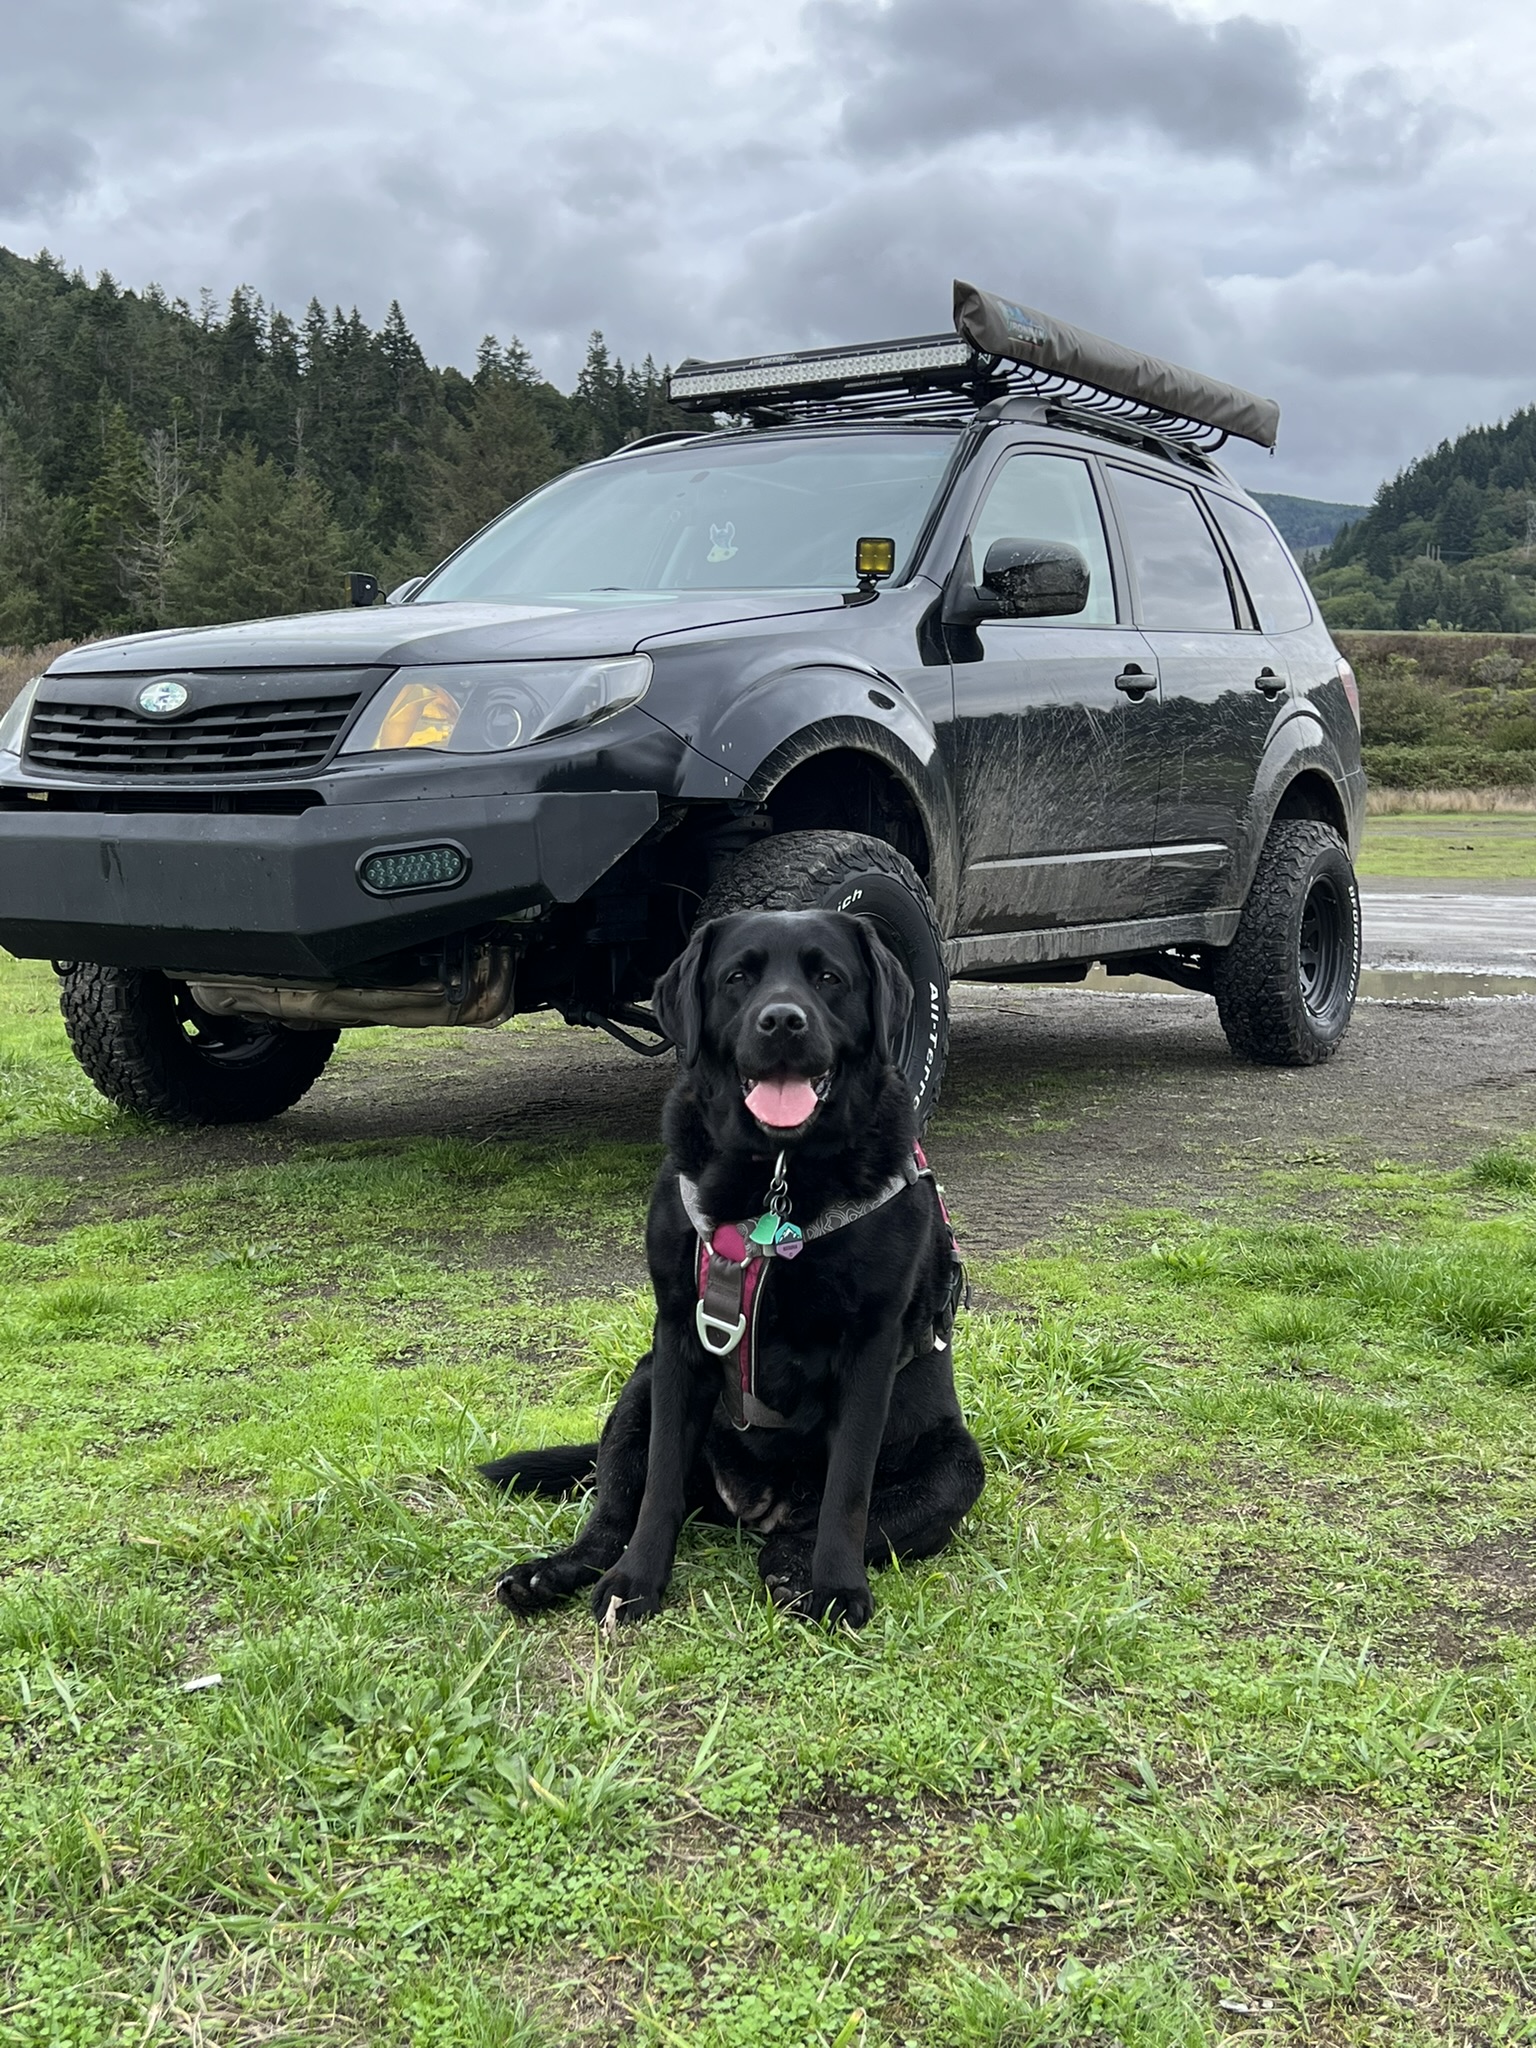 subaru forester offroad modified with dog